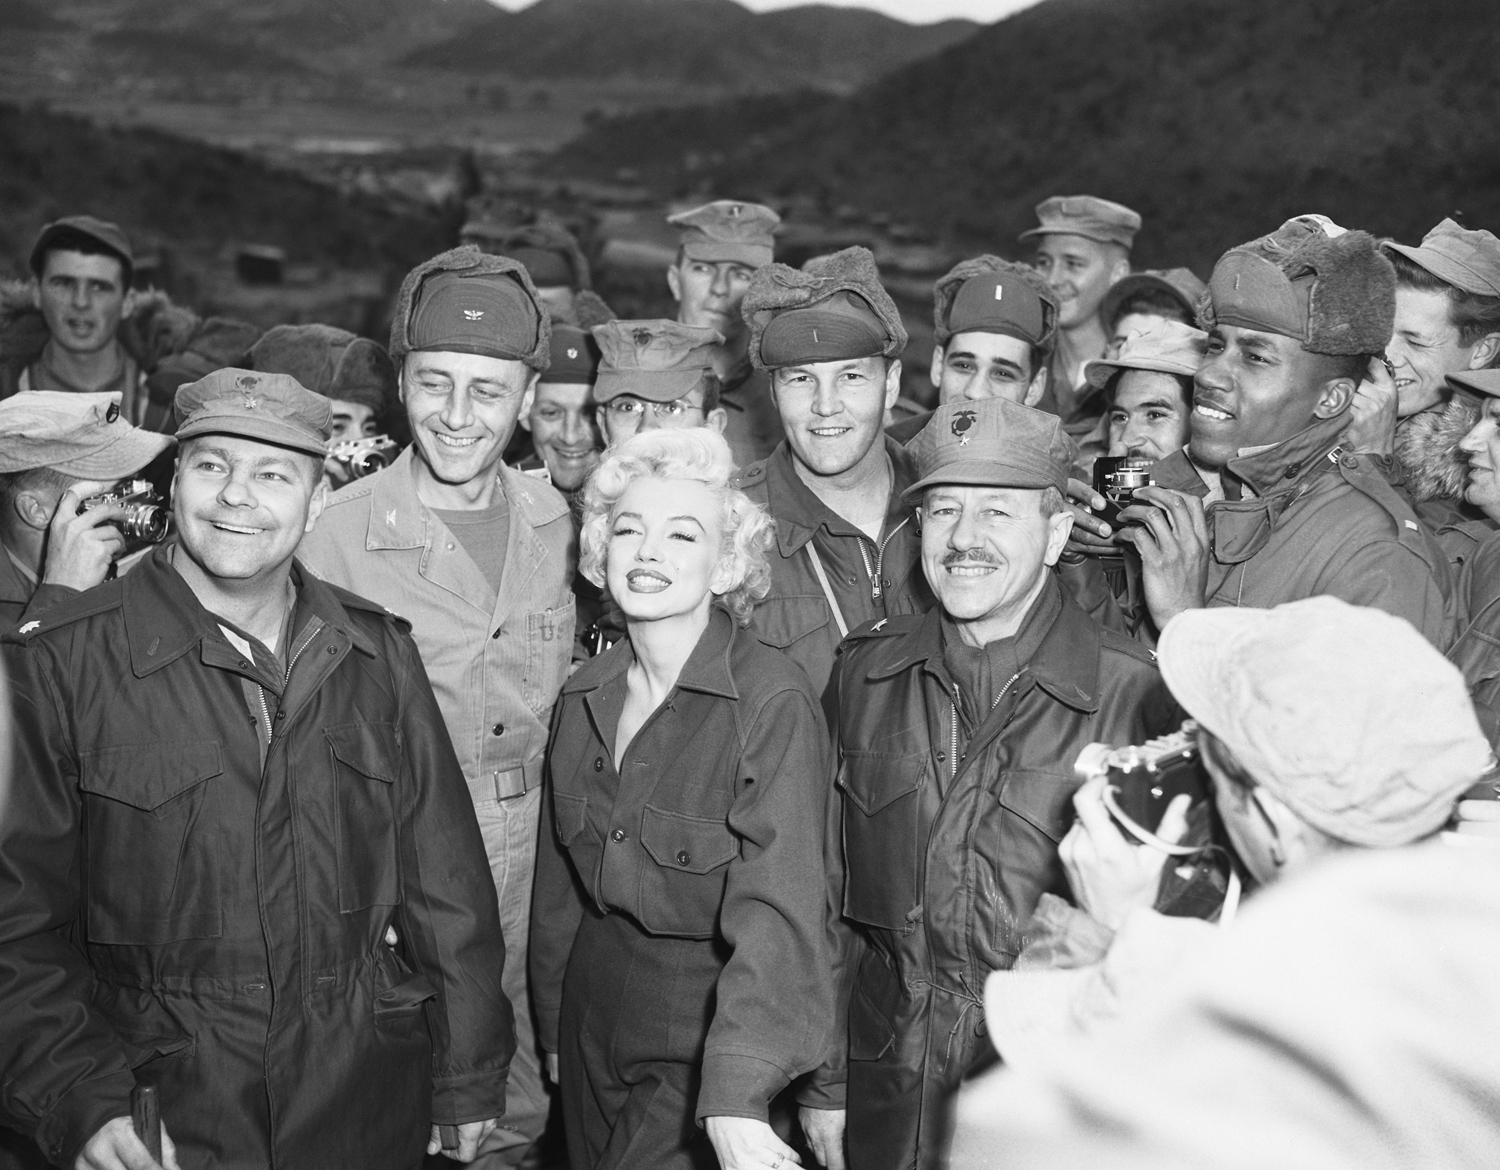 The star posing with troops in South Korea in 1954.